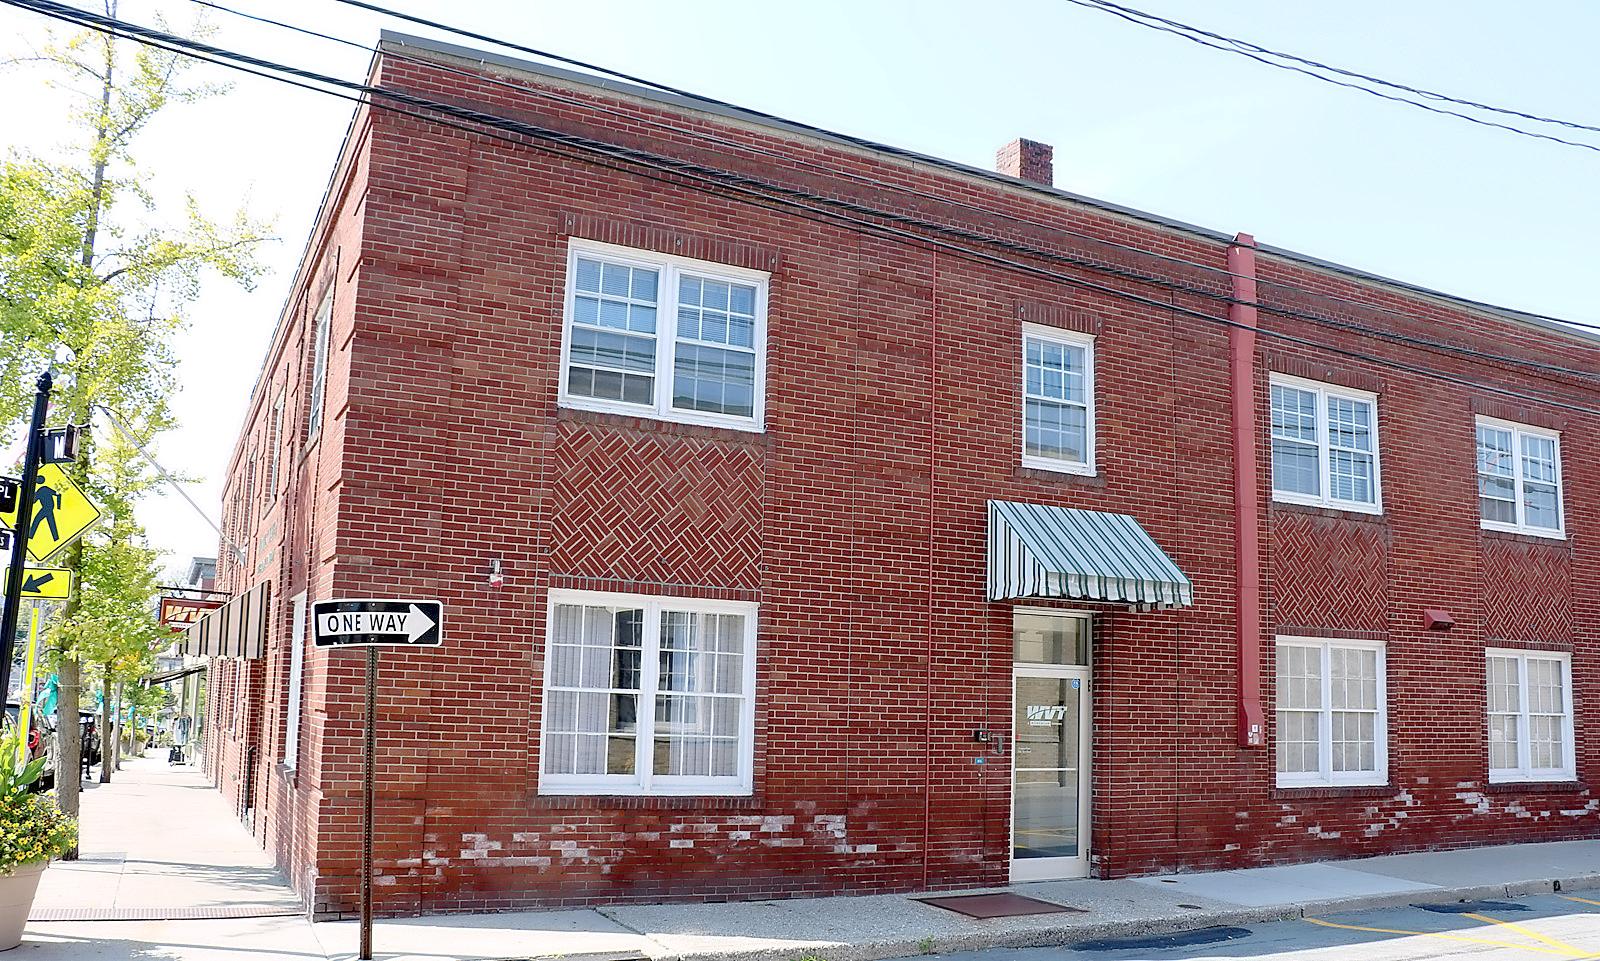 In 1949 Warwick Valley Telephone moved into a new building, the company's current location at 47 Main Street.